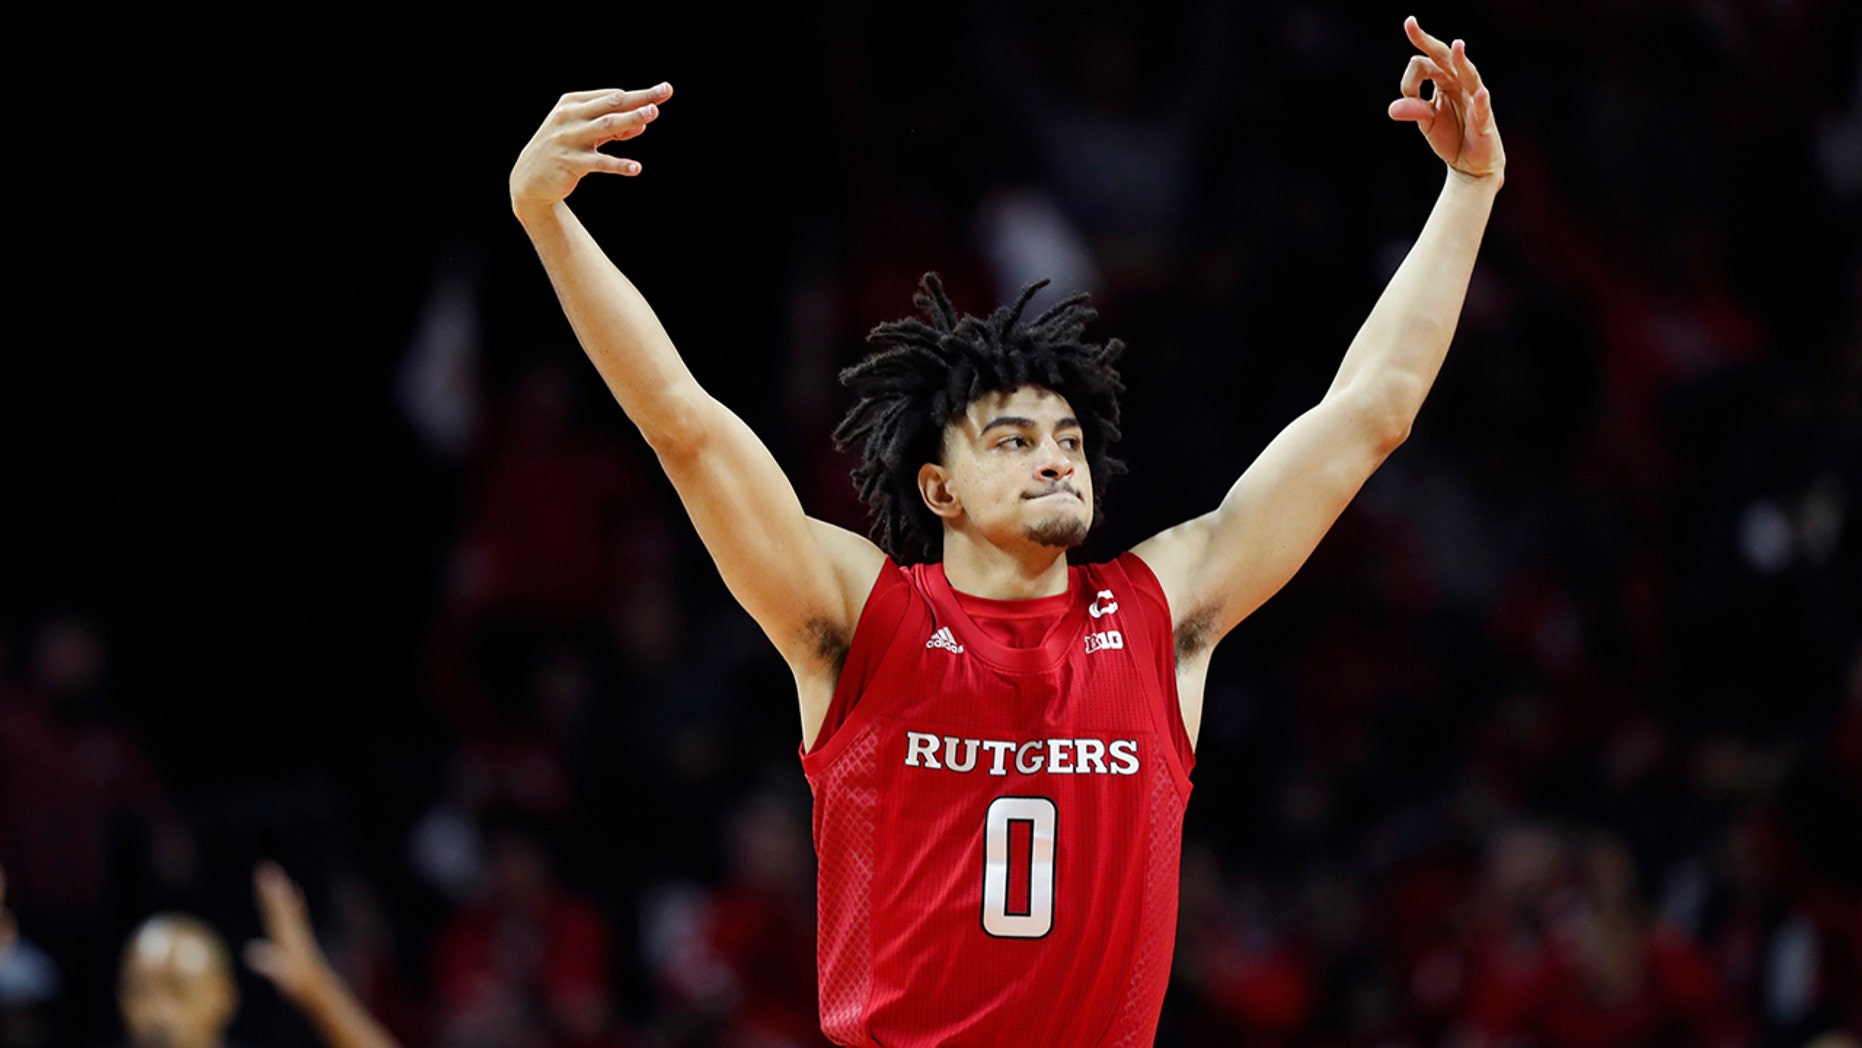 Rutgers guard Geo Baker (0) celebrates after hitting a three-point shot during the first half of an NCAA college basketball game against Seton Hall, Saturday, Dec. 14, 2019, in Piscataway, N.J. (AP Photo/Kathy Willens)